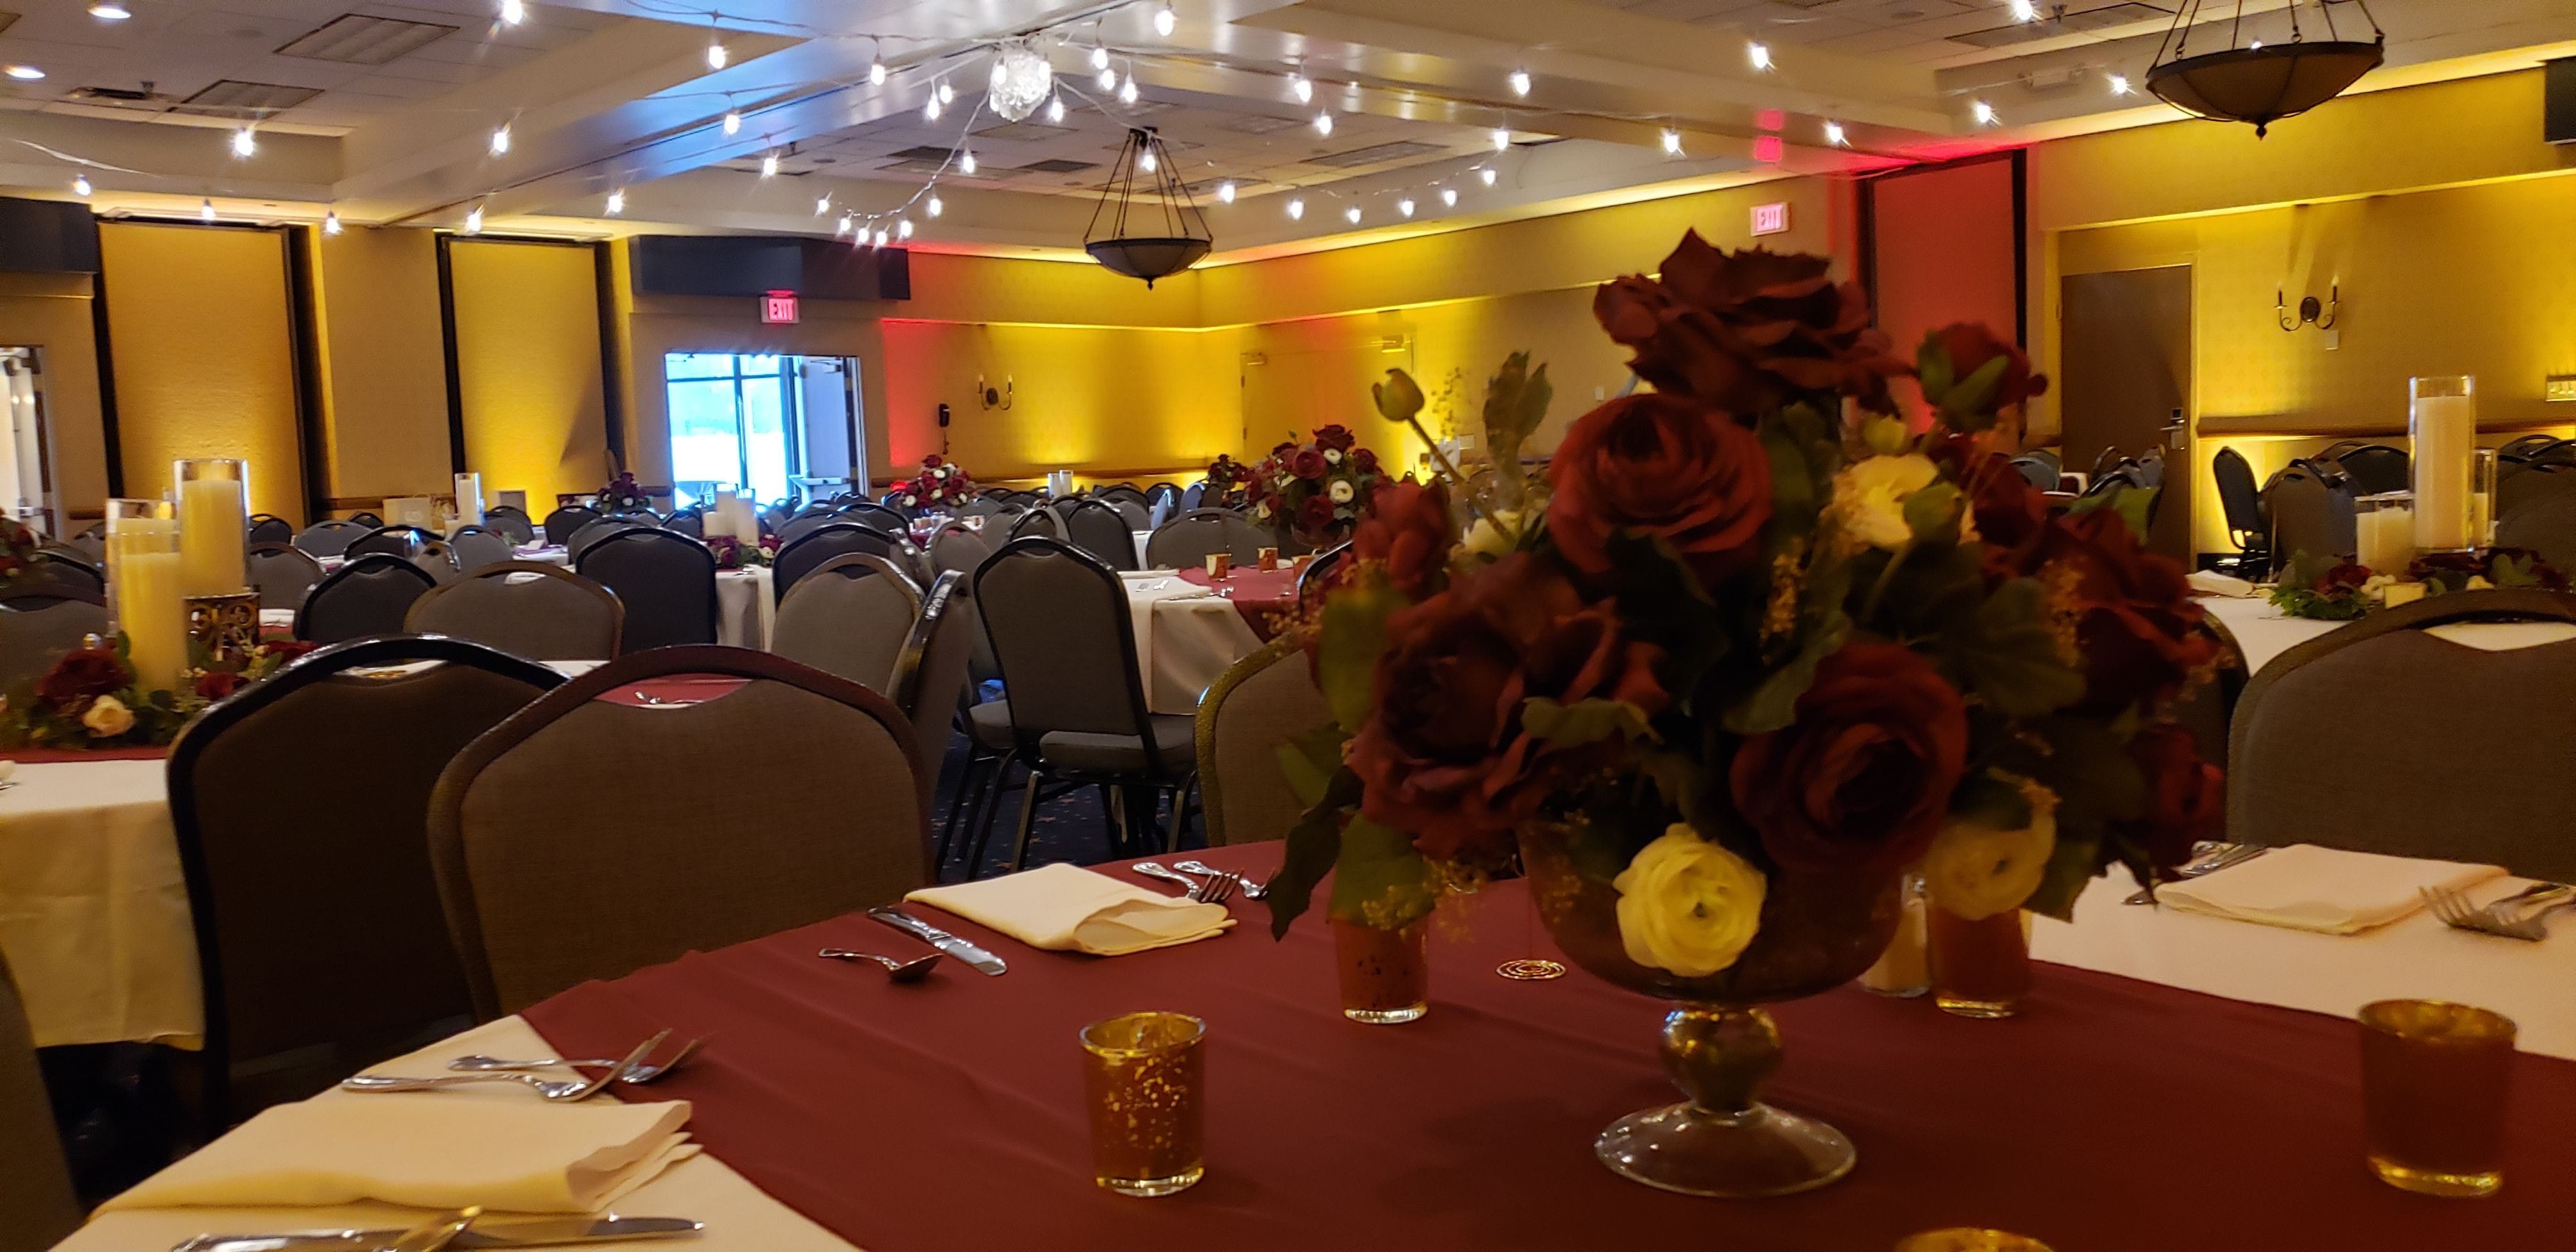 Inn on Lake Superior.
Wedding lighting in gold and dim red with bistro on the ceiling.